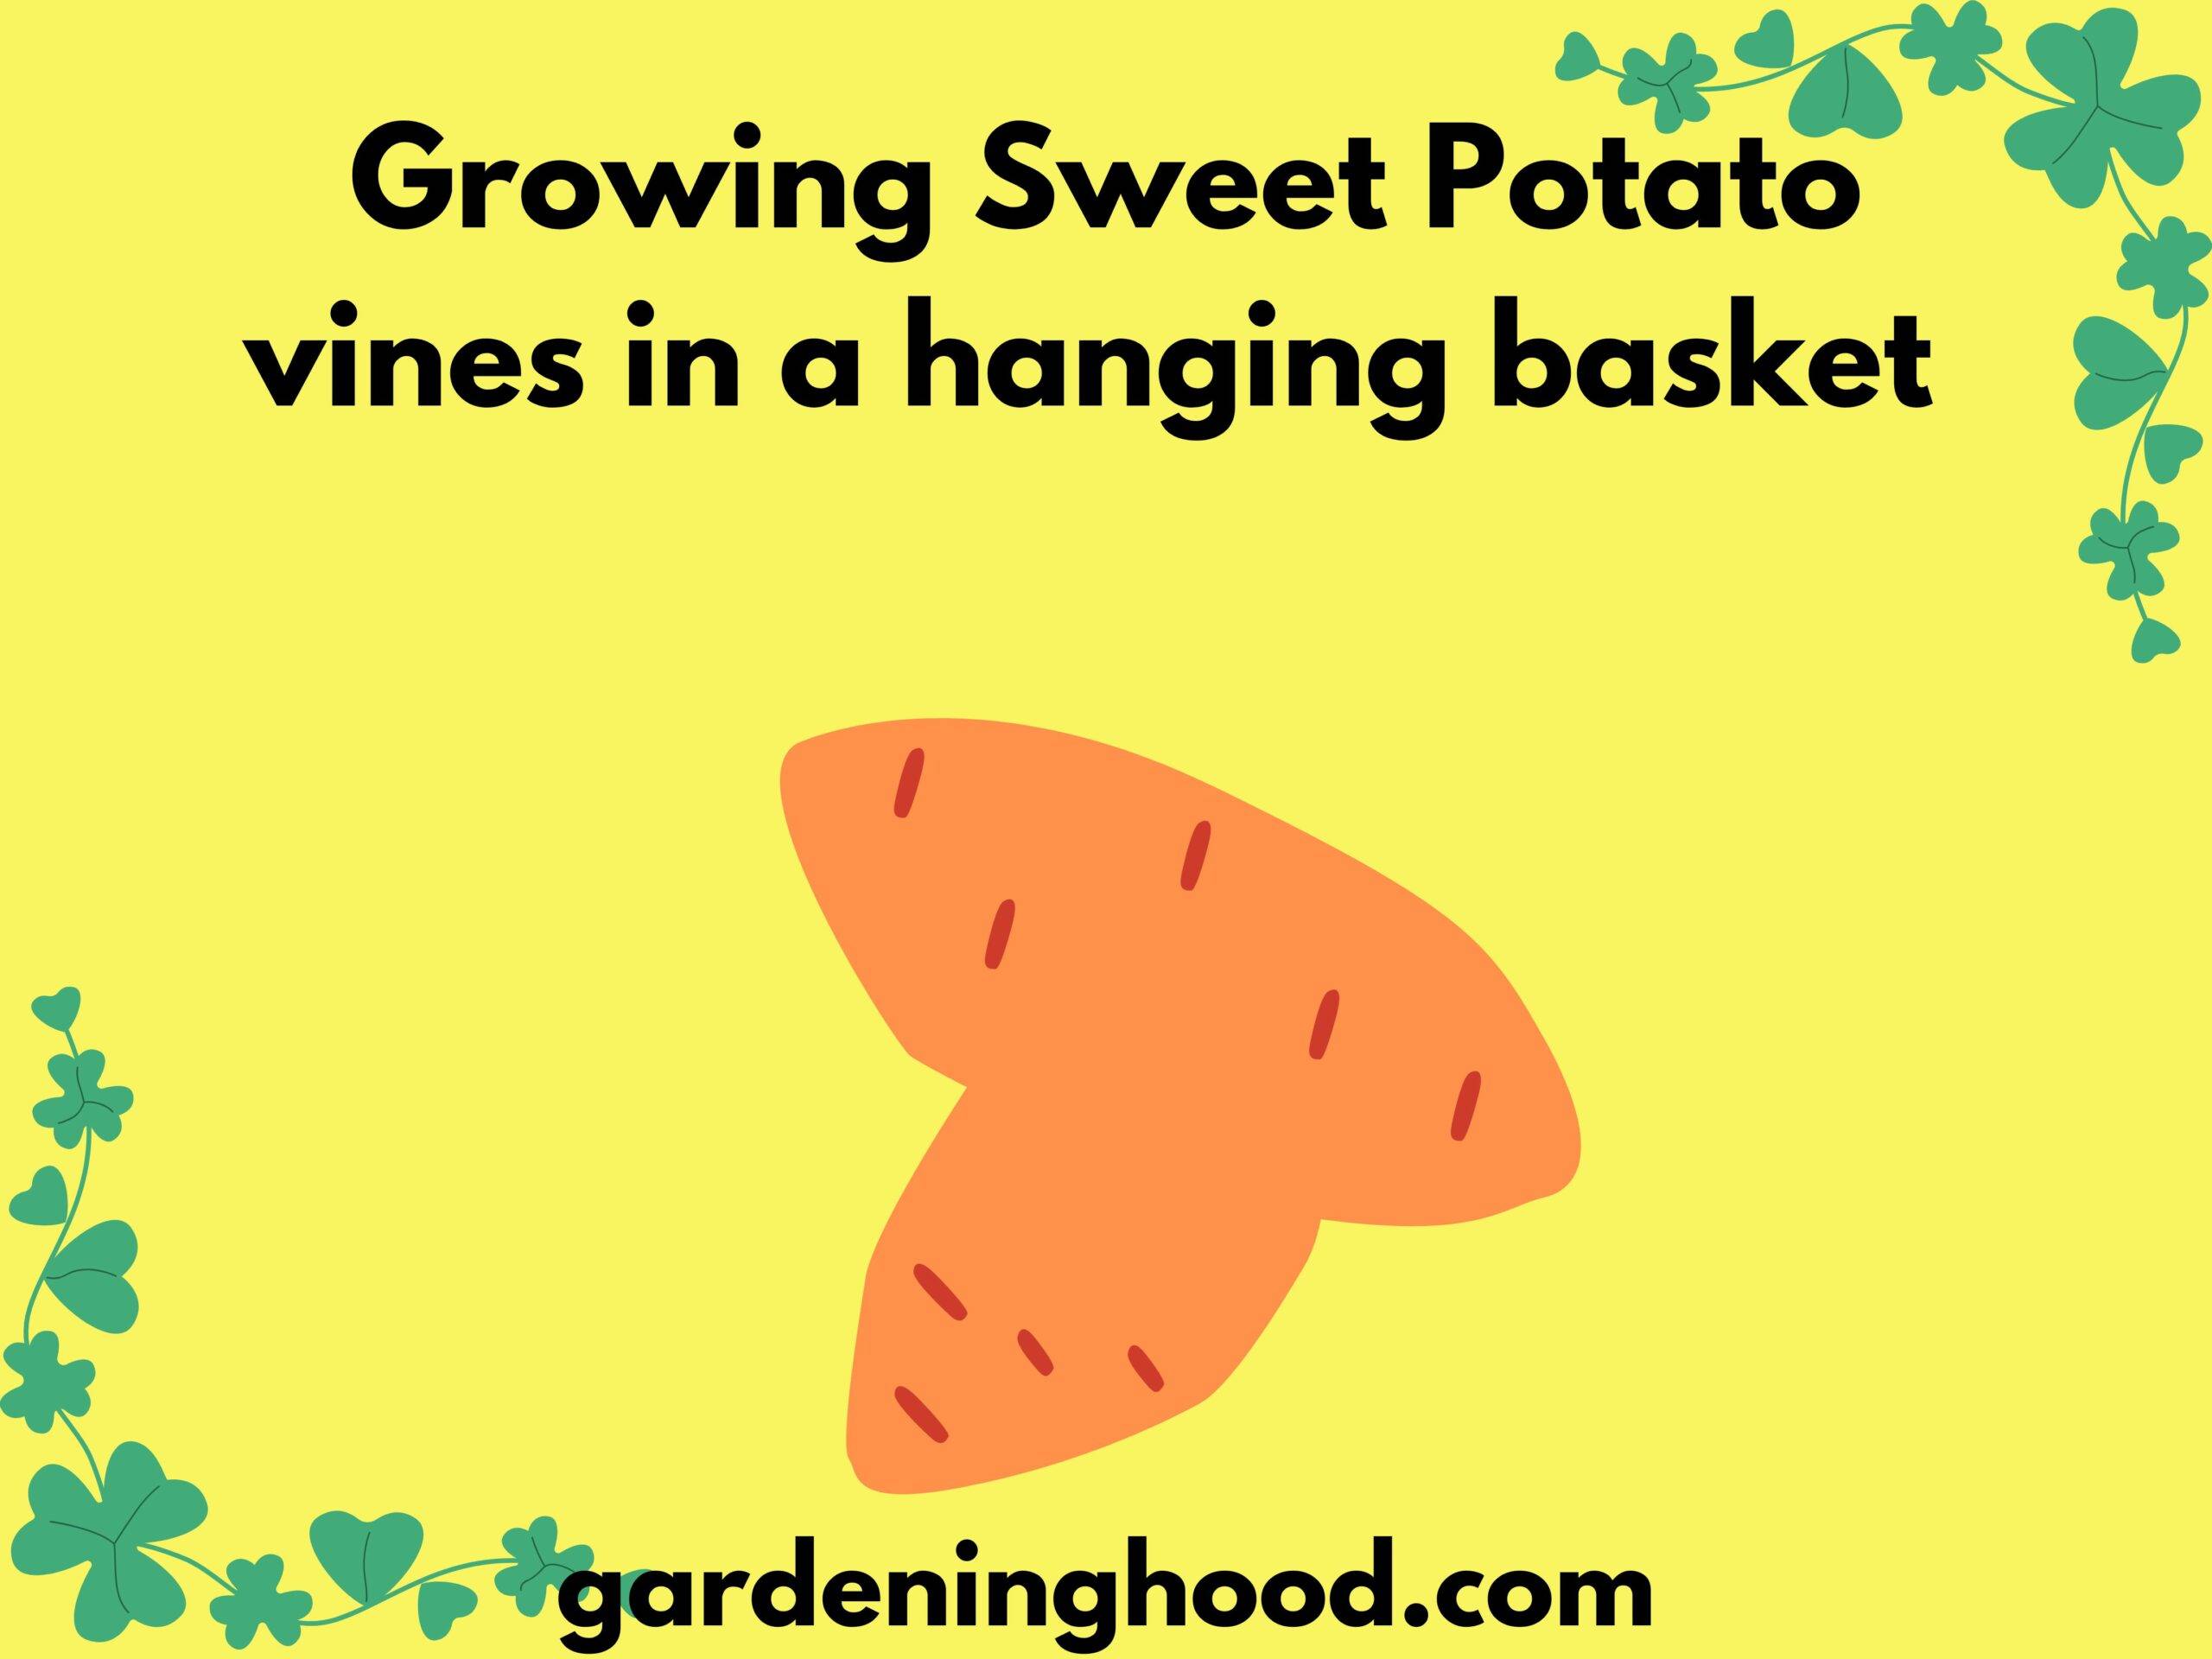 <strong>Growing Sweet Potato vines in a hanging basket </strong>